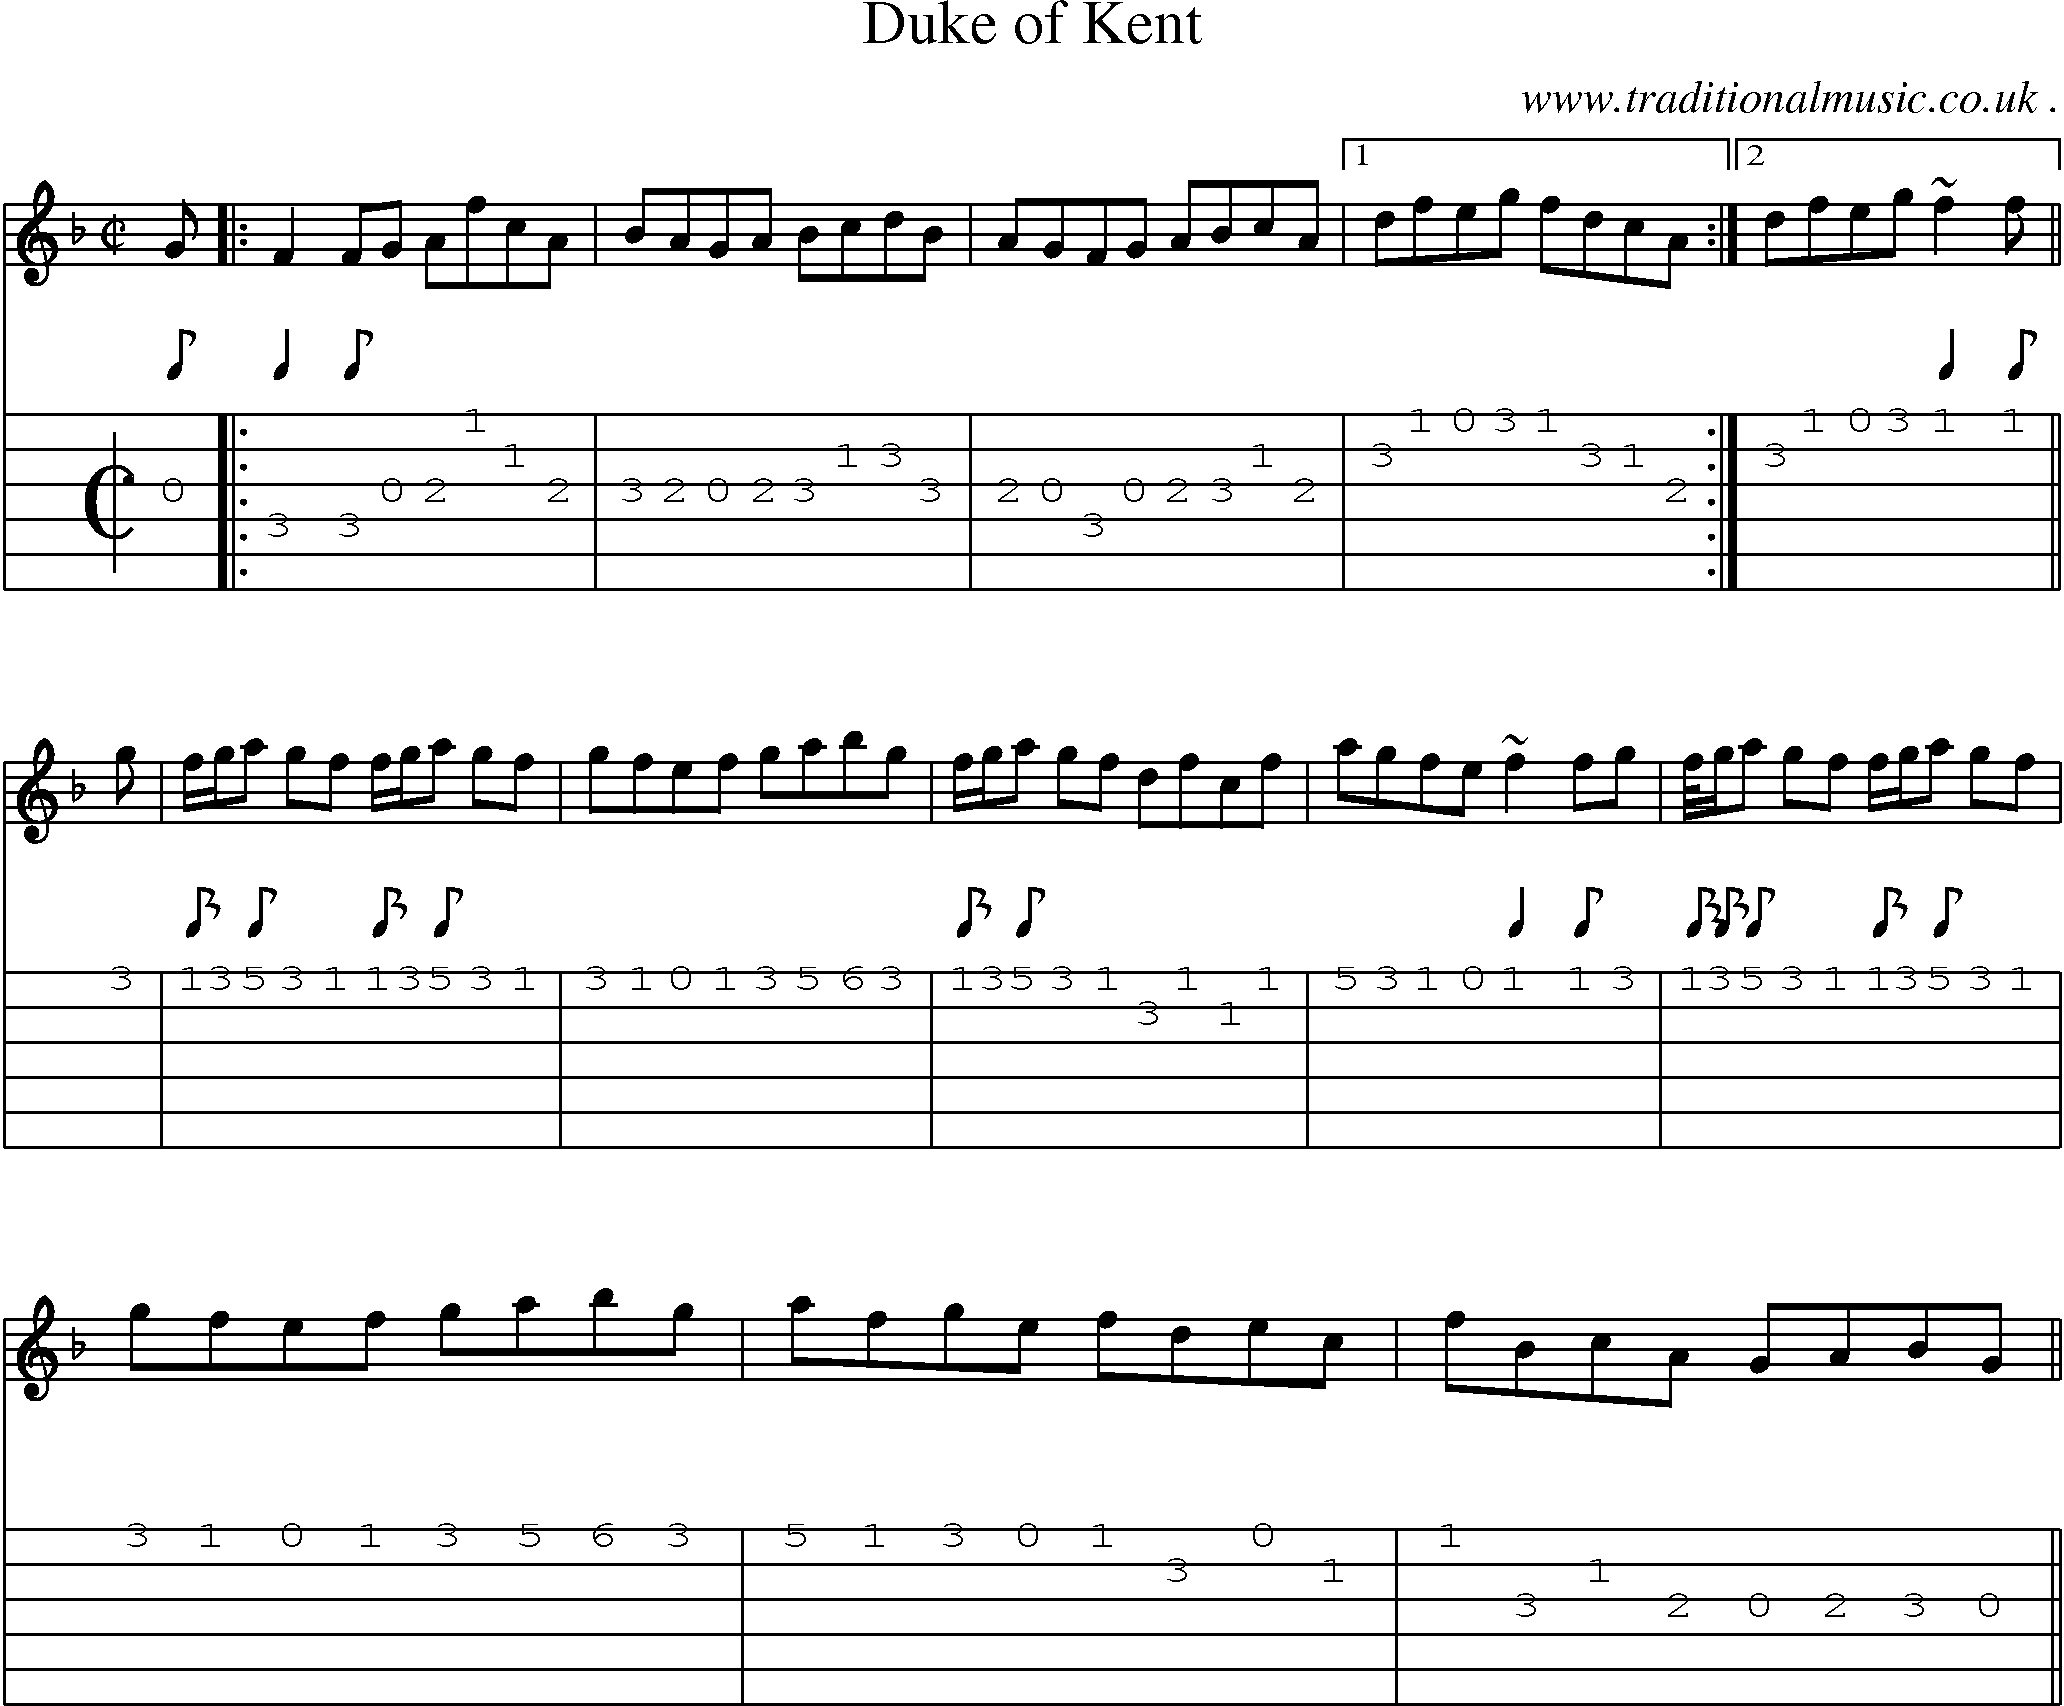 Sheet-music  score, Chords and Guitar Tabs for Duke Of Kent